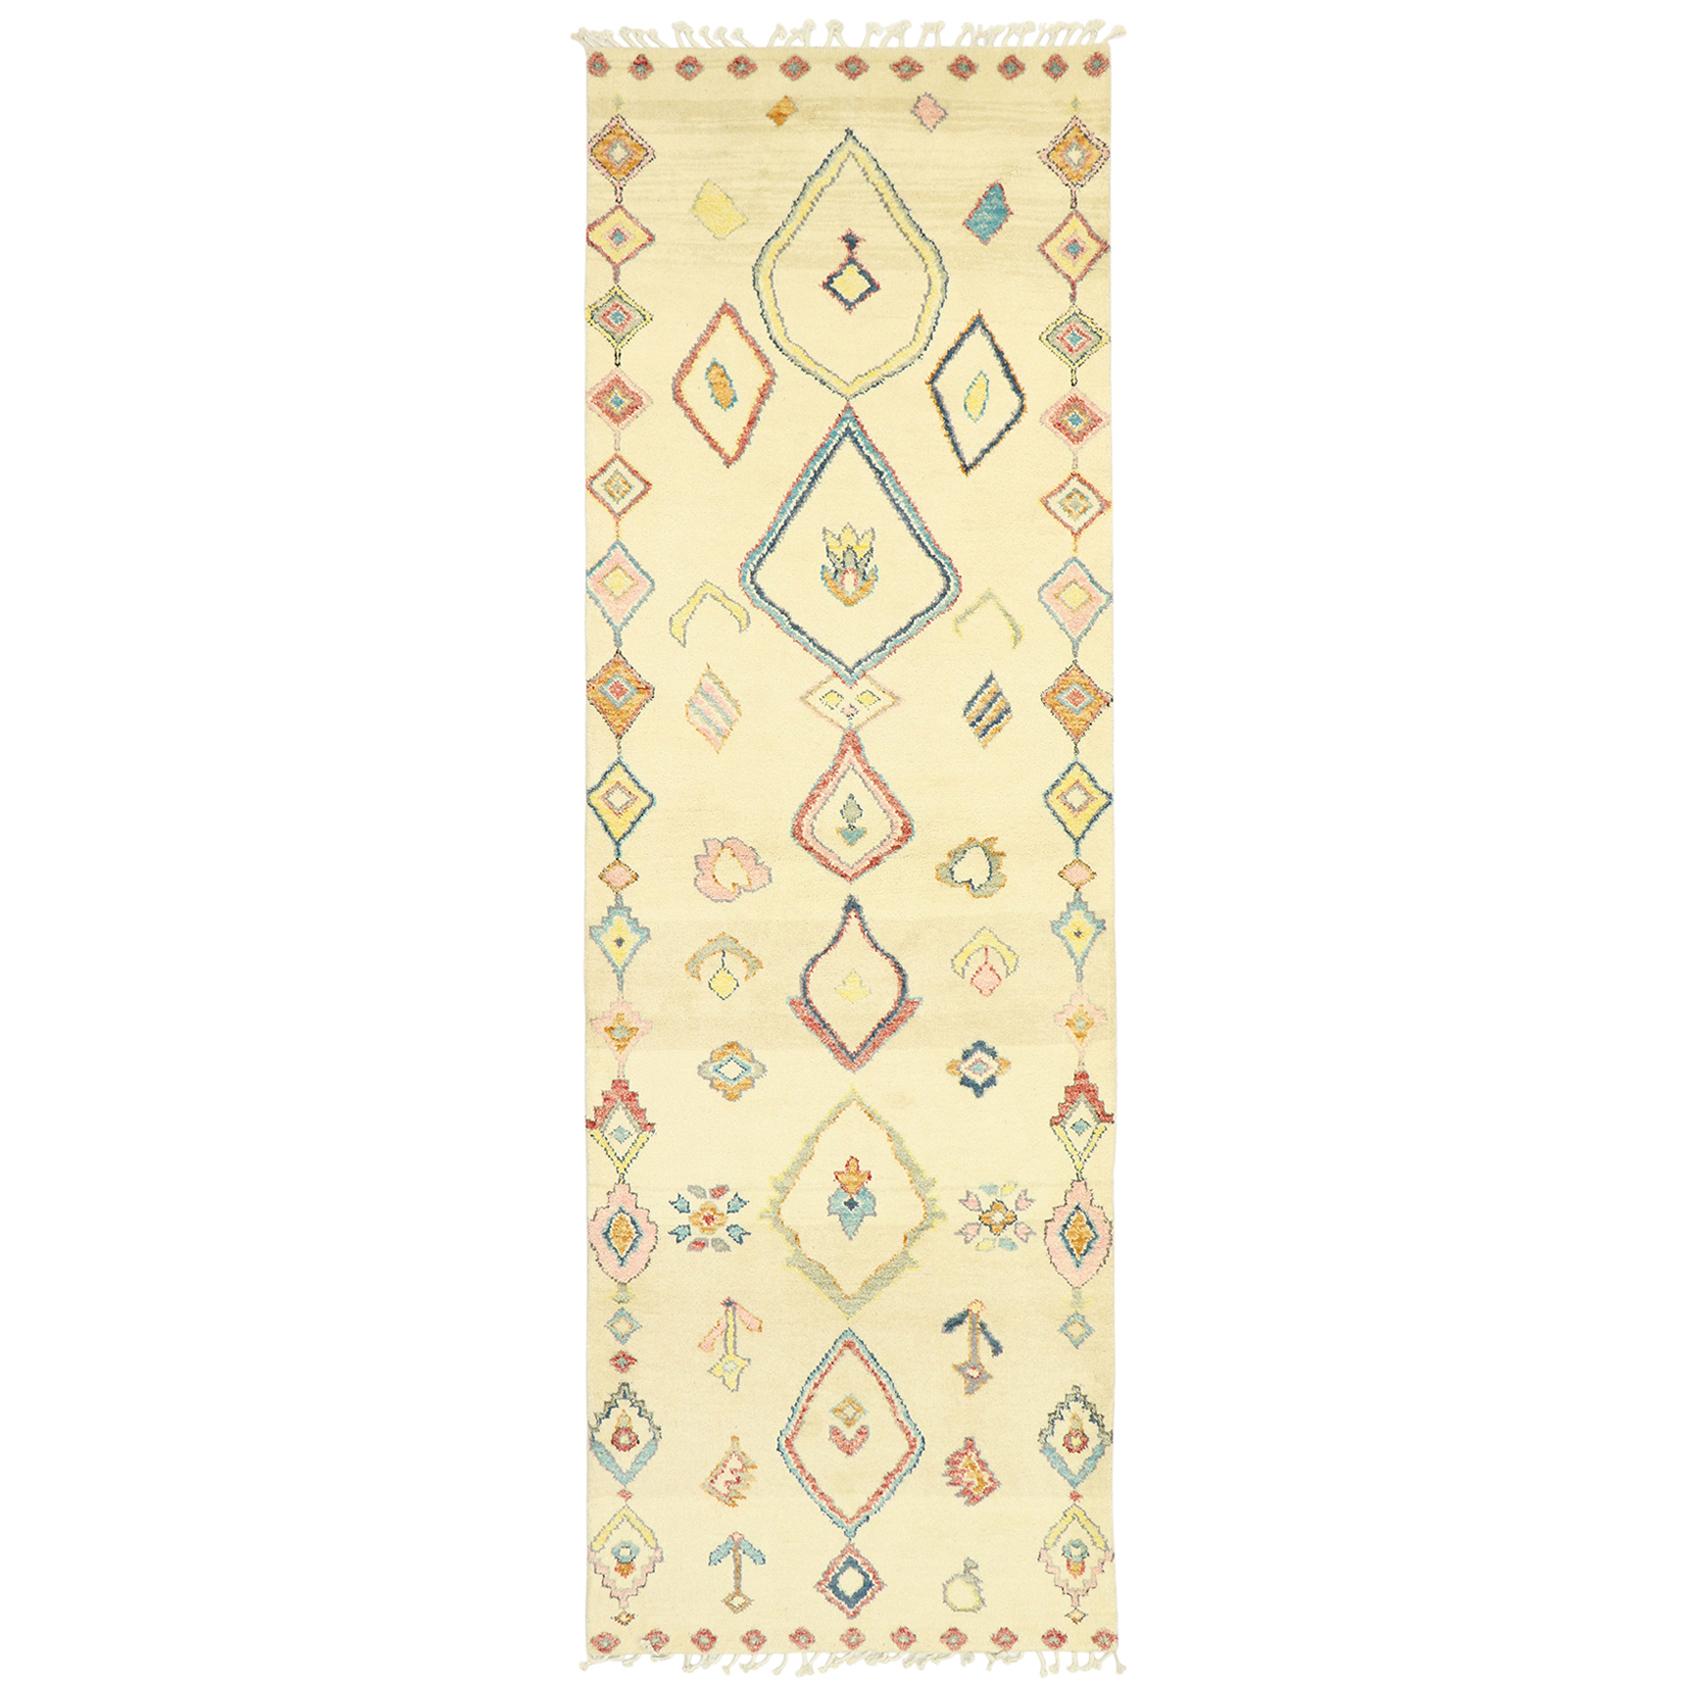 Colorful Moroccan Rug Runner, Cozy Boho Meets Eclectic Jungalow For Sale